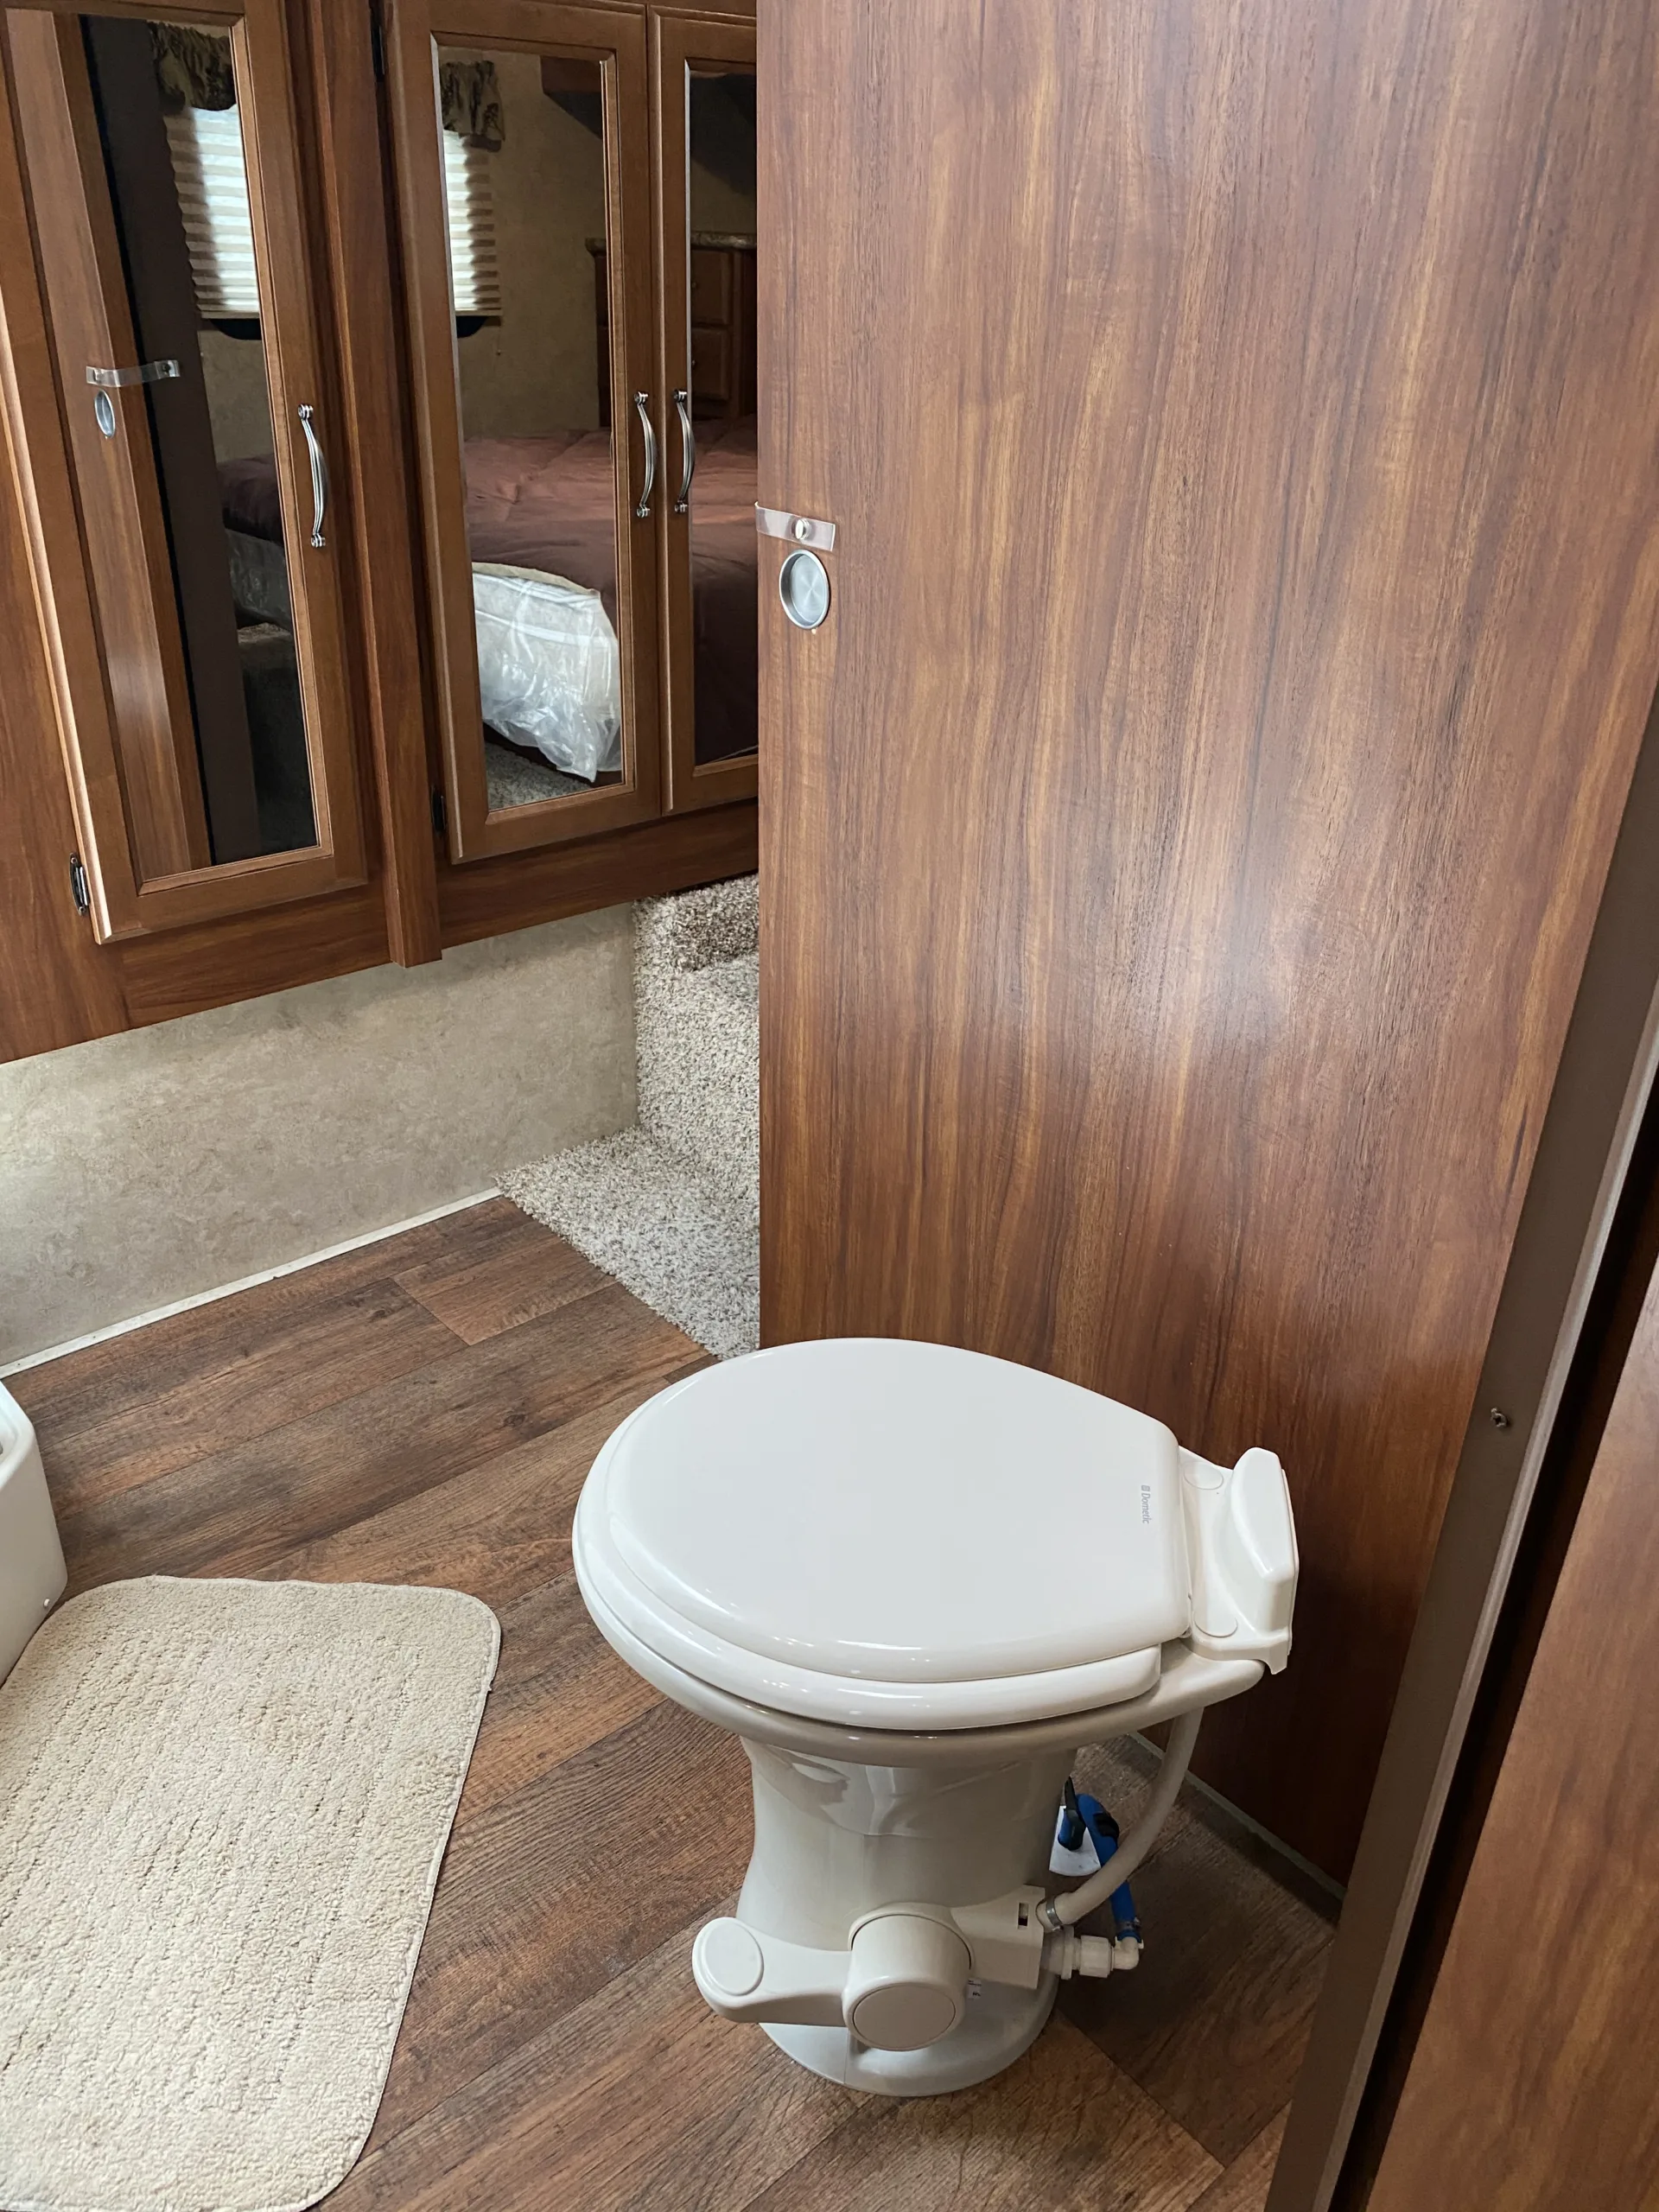 toilet before renovation in fifth wheel camper